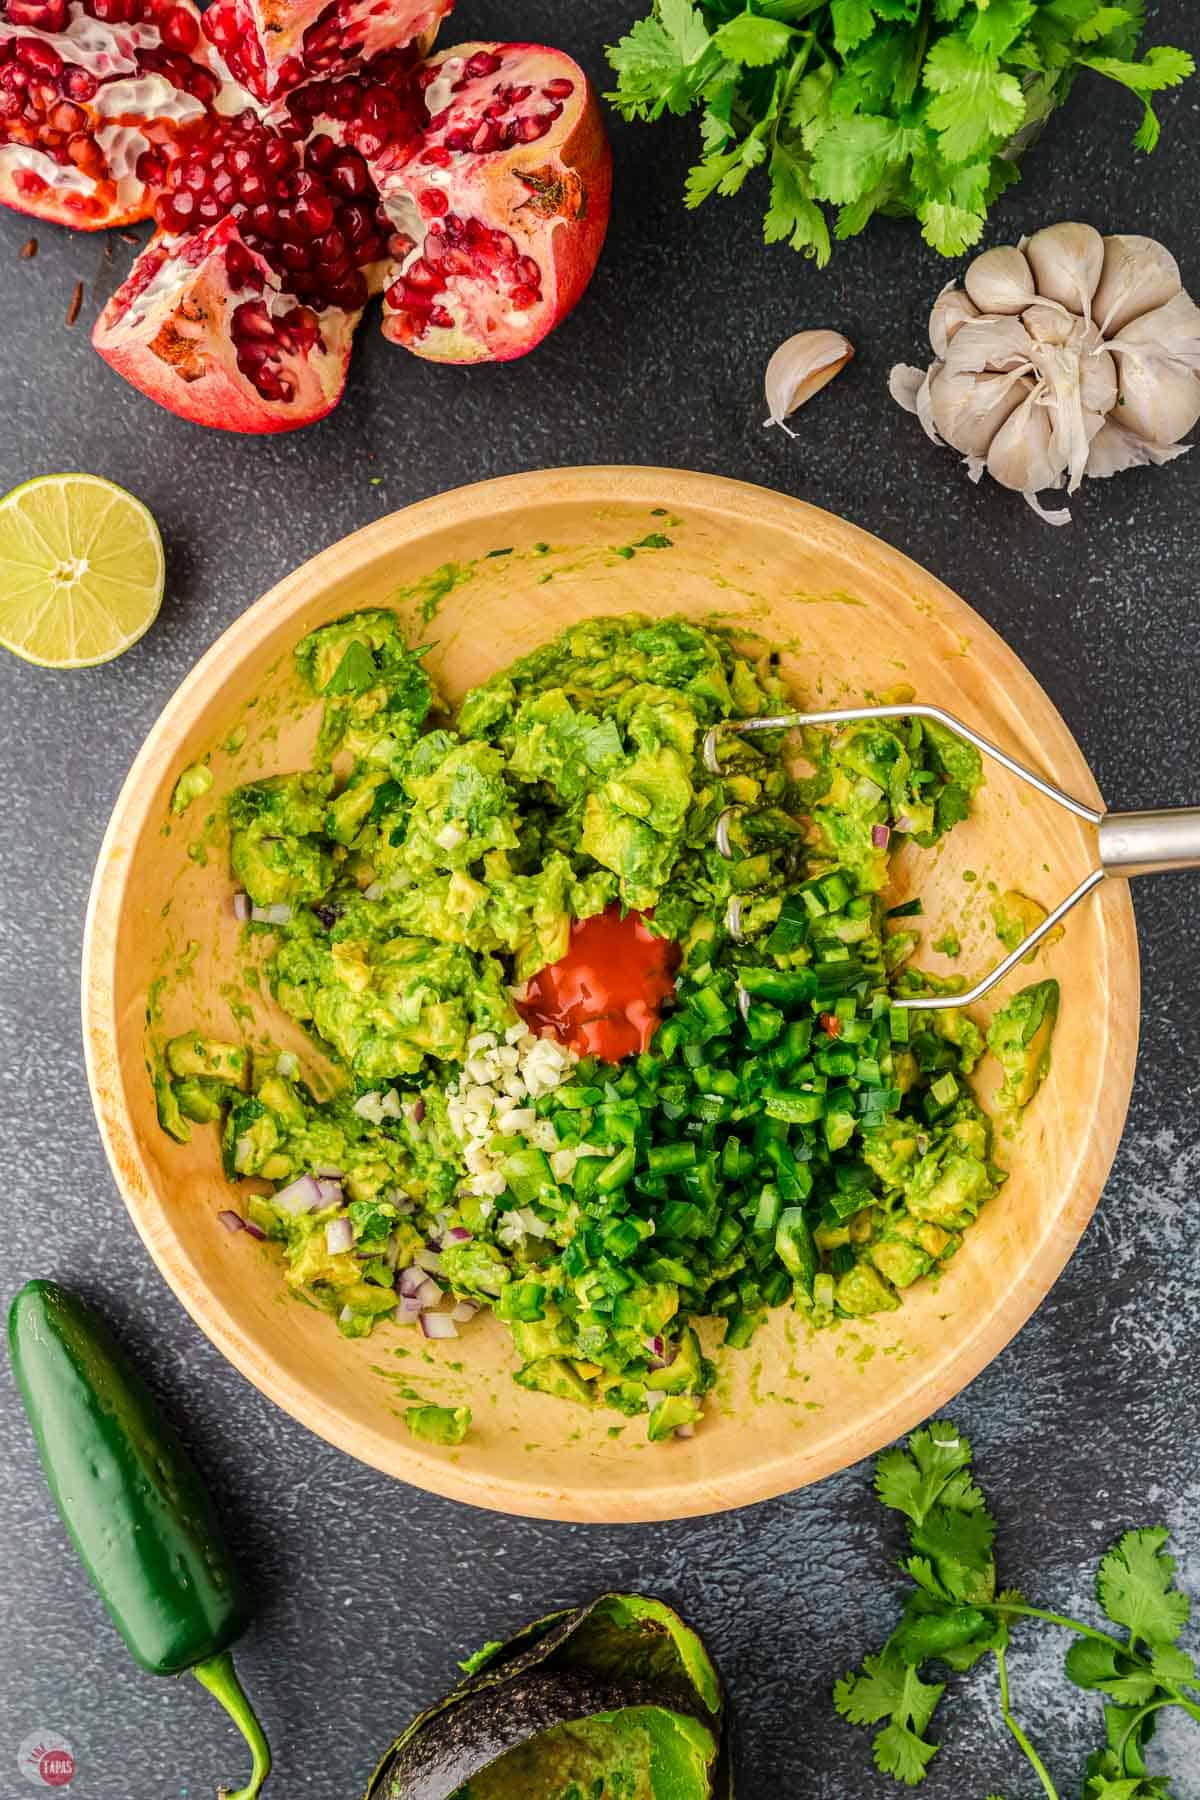 chunky guacamole is one of my favorite mexican dishes